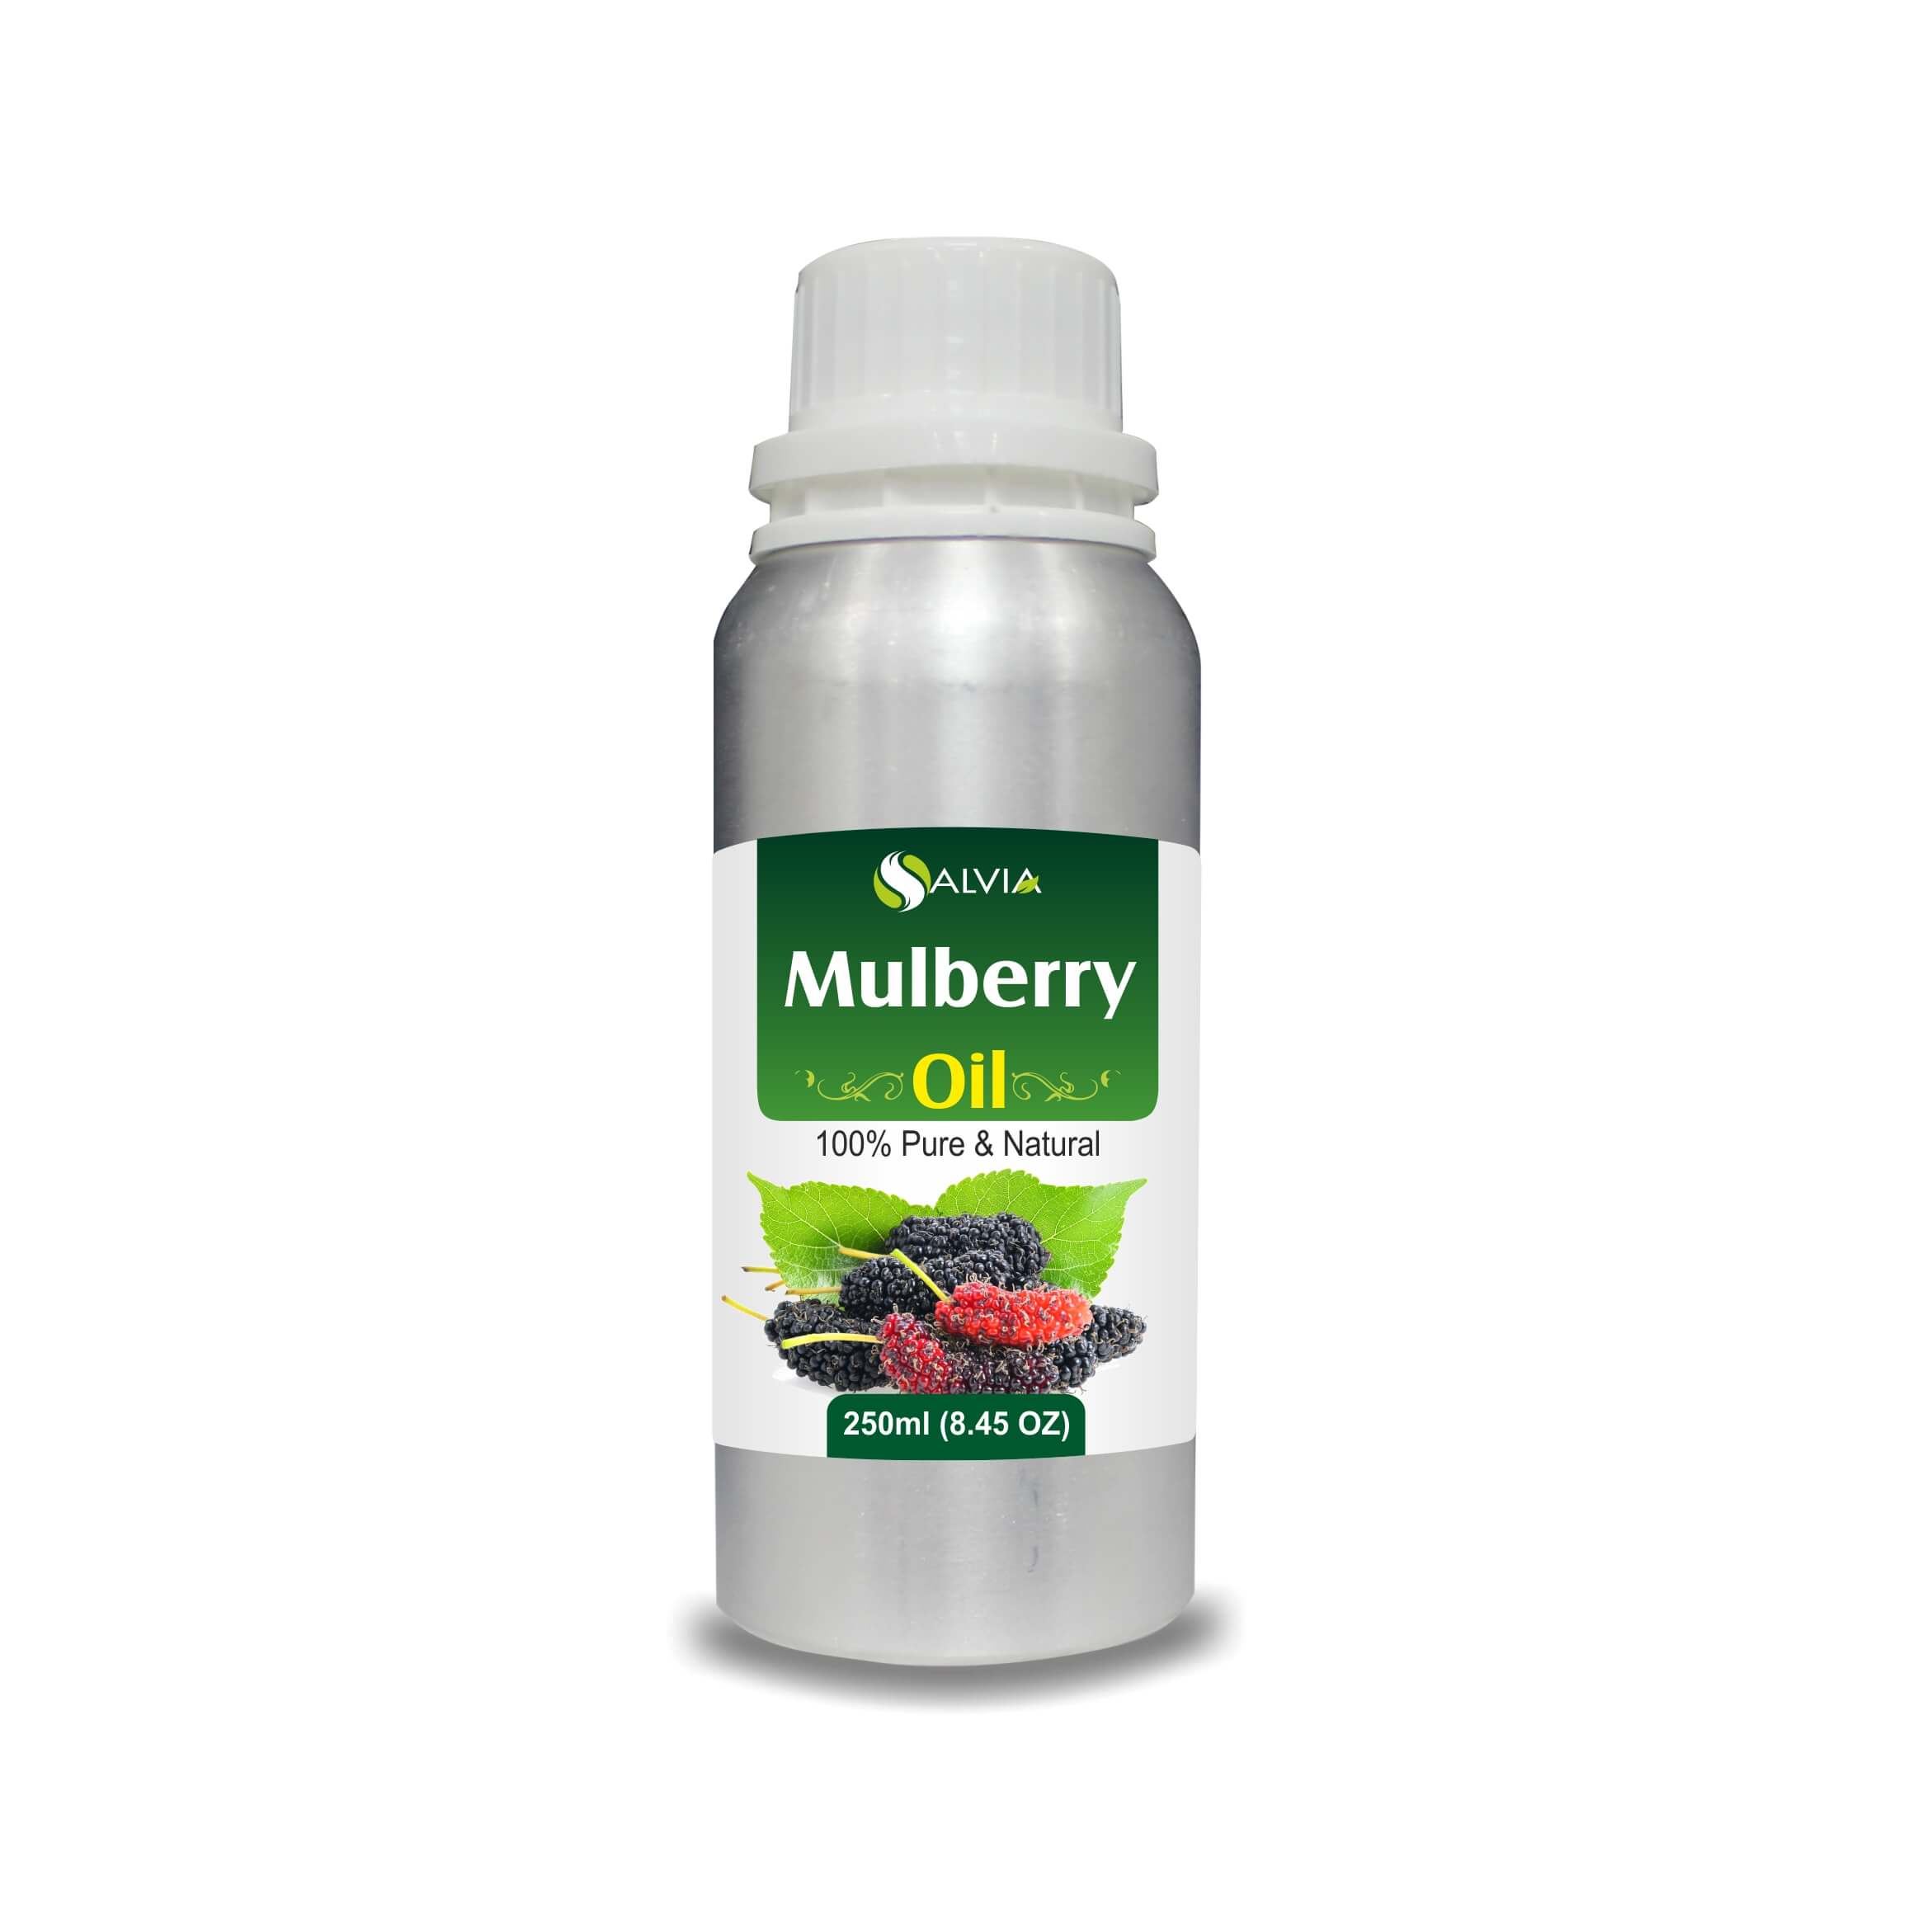 Salvia Natural Essential Oils 250ml Mulberry Oil (Morus alba) Pure, Natural And Cold Pressed Mulberry oil | For Diffusers, Soap Making, Candles, Lotion, Home Scents, Bath Bombs, DIY Homemade Products